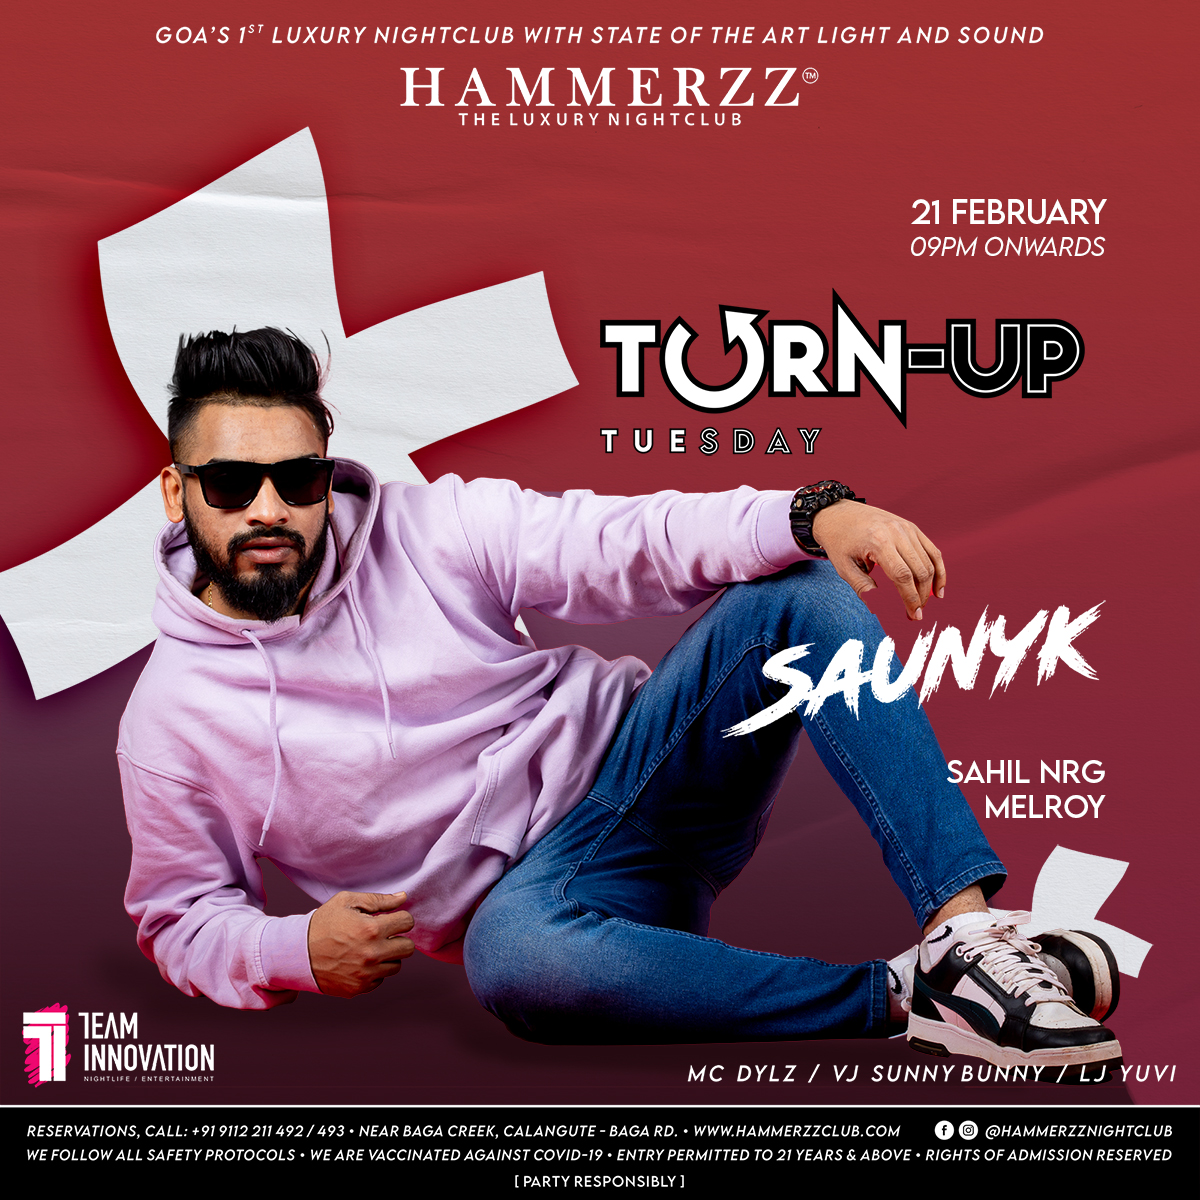 Feel the good vibes permeated by Saunyk, DJ Sahil & DJ Melroy this Turn-up Tuesday. Move your body to the tunes of the night. Join us for a fun filled night at #Hammerzz the Luxury Nightclub.
9112211491/92/93/94 for reservations

#luxurynightclub #goaparty #goadiaries #nightparty